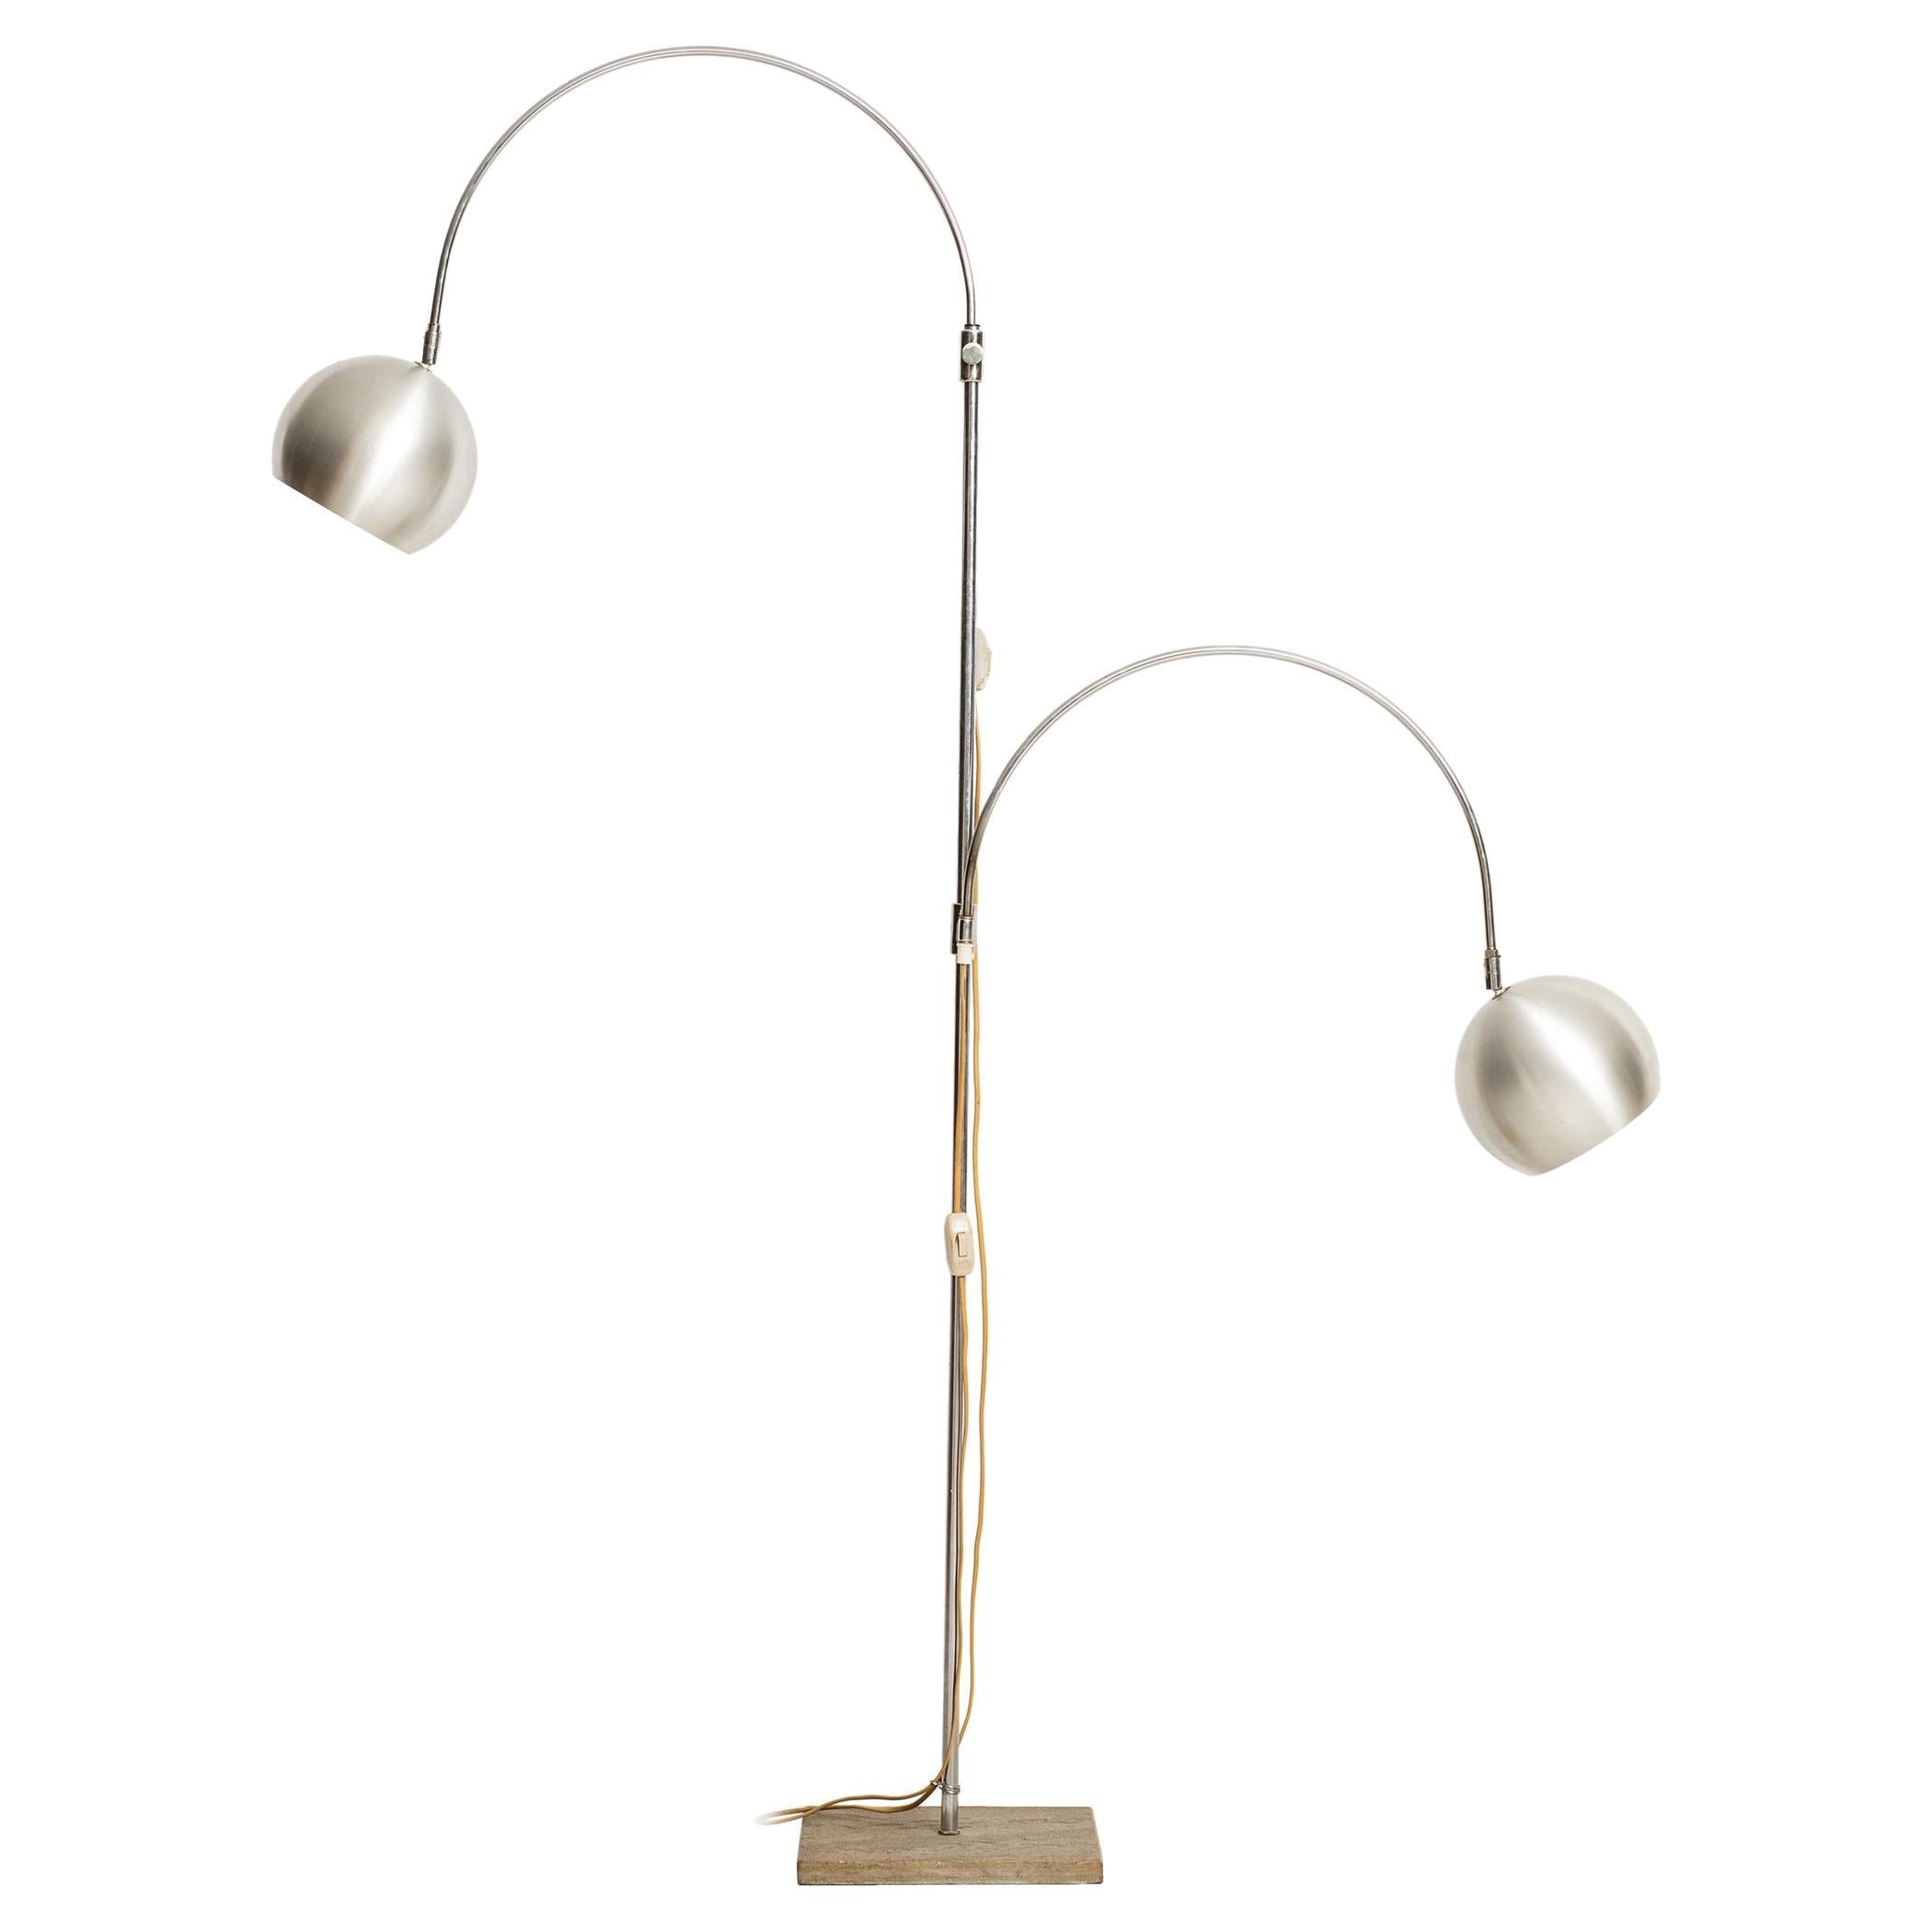 Large Floor Lamp With 2 Flexible Arms, Flexible Arm Table Lamp